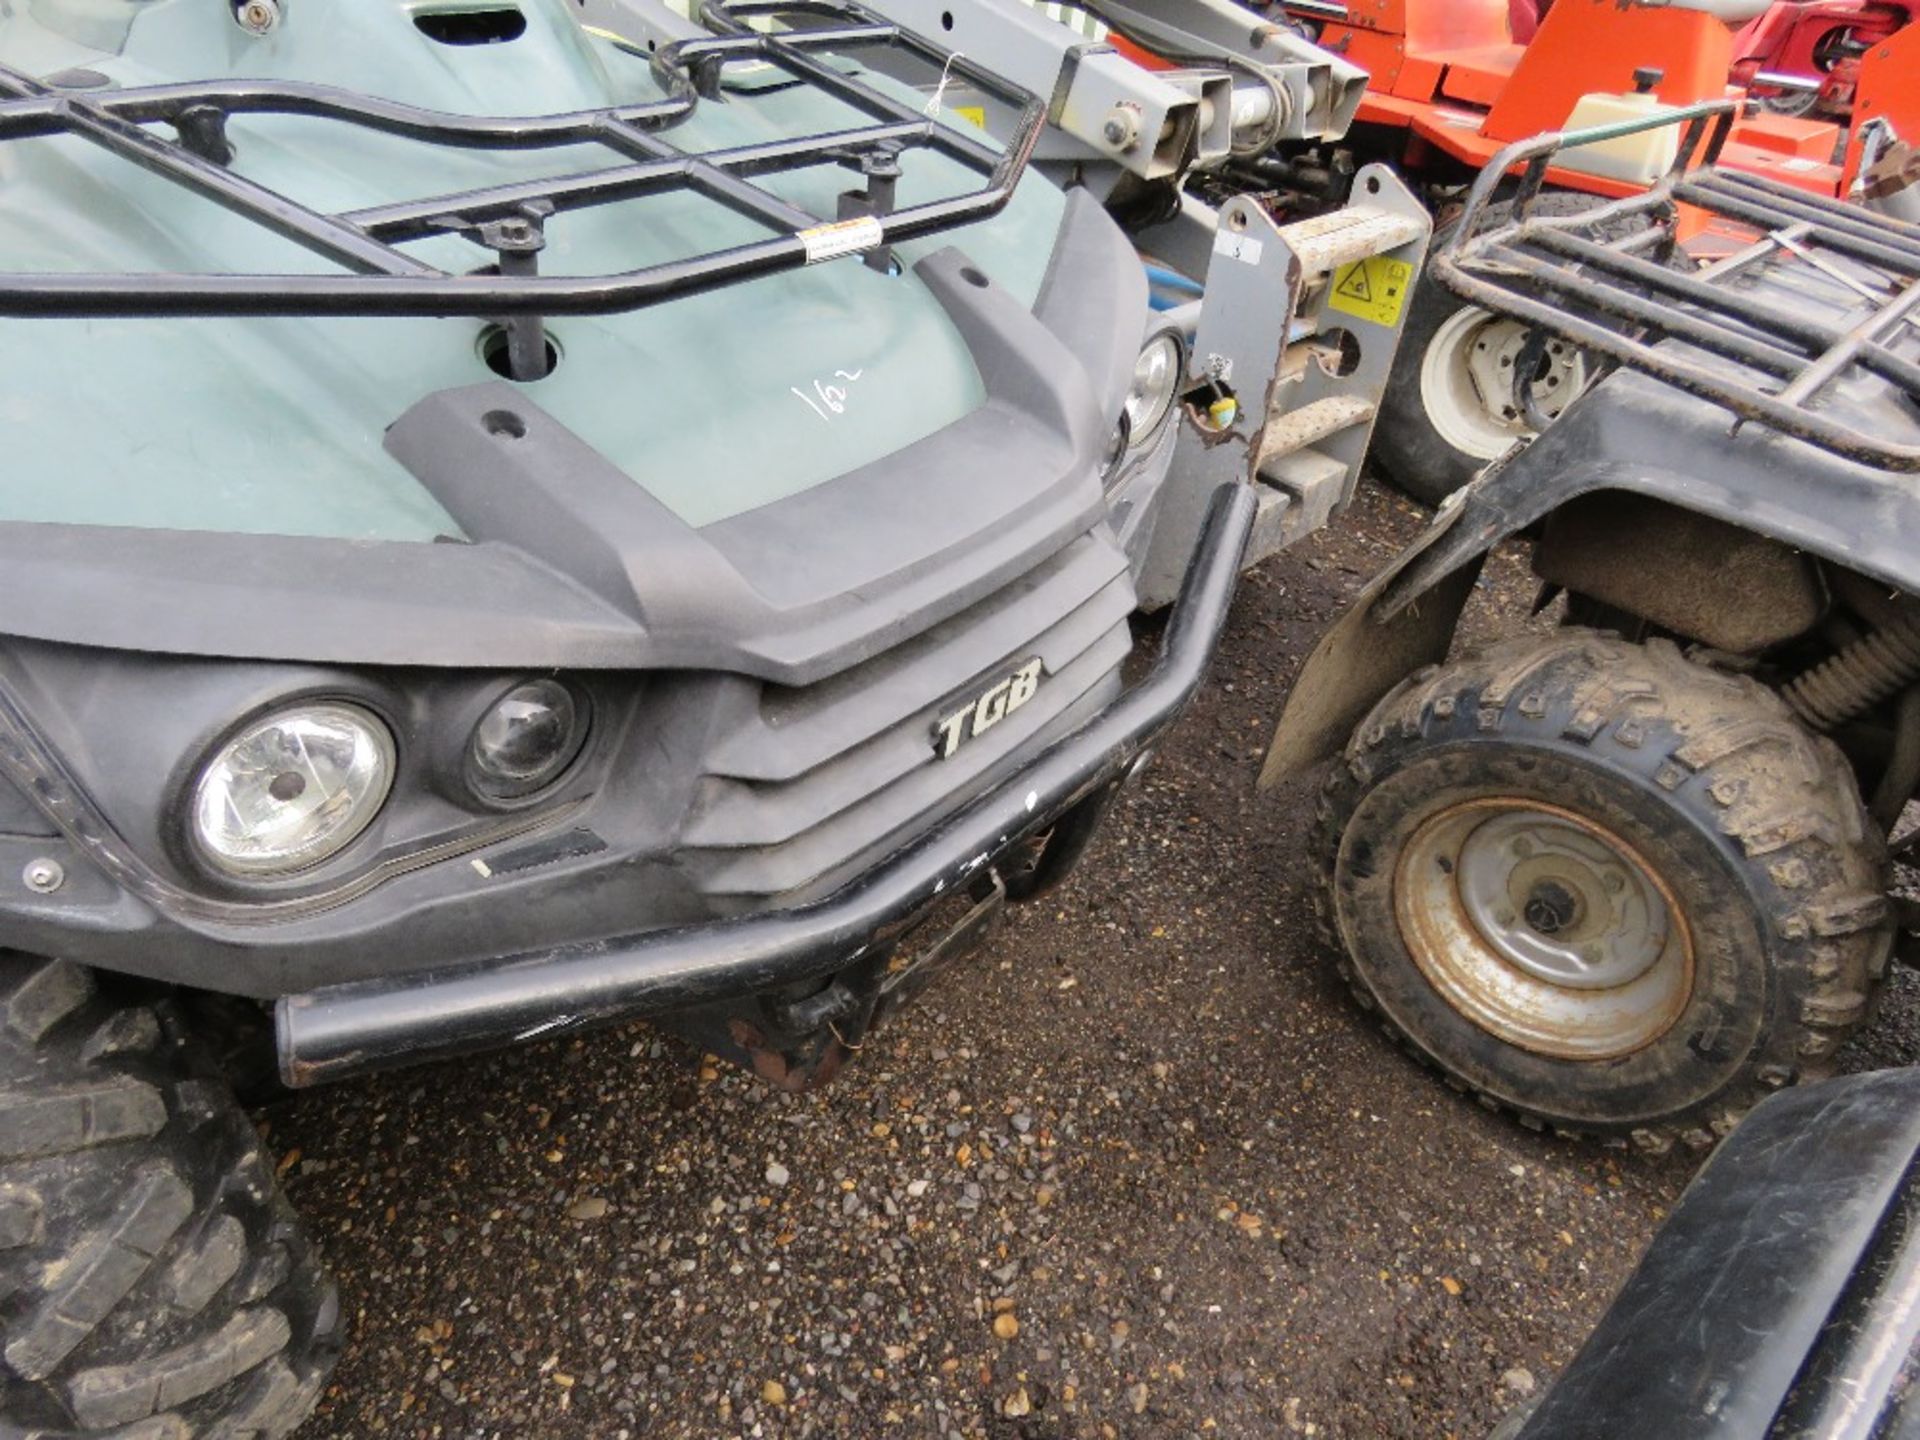 TGB AGROCARRIER FARM QUAD BIKE WITH CARRYING TRAY, 2003REC MILES, YEAR 2014. WHEN TESTED WAS SEEN - Image 2 of 7